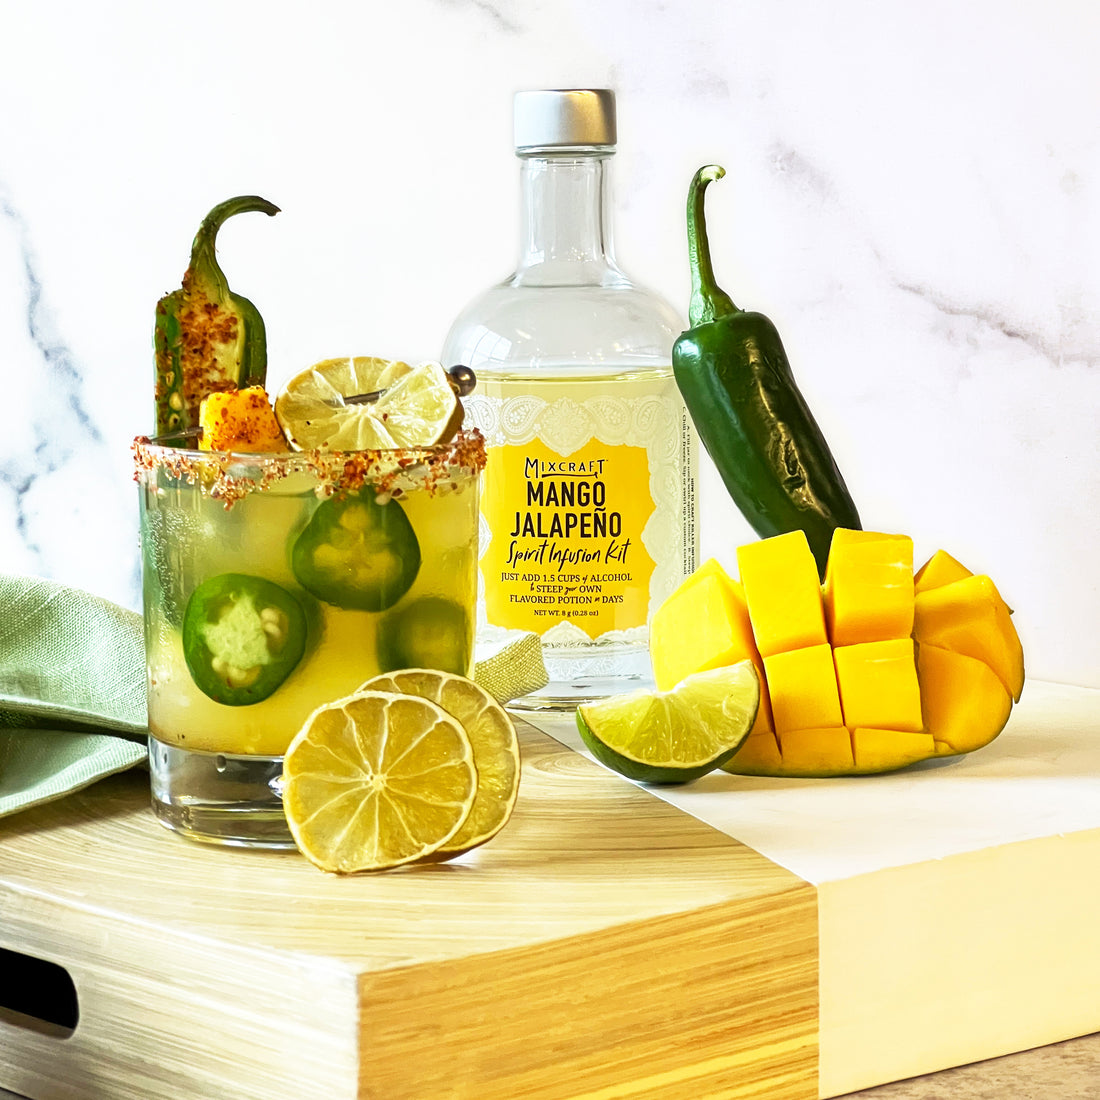 The "Burning Desire" cocktail is made with the Mango Jalapeño Spirit Infusion Kit